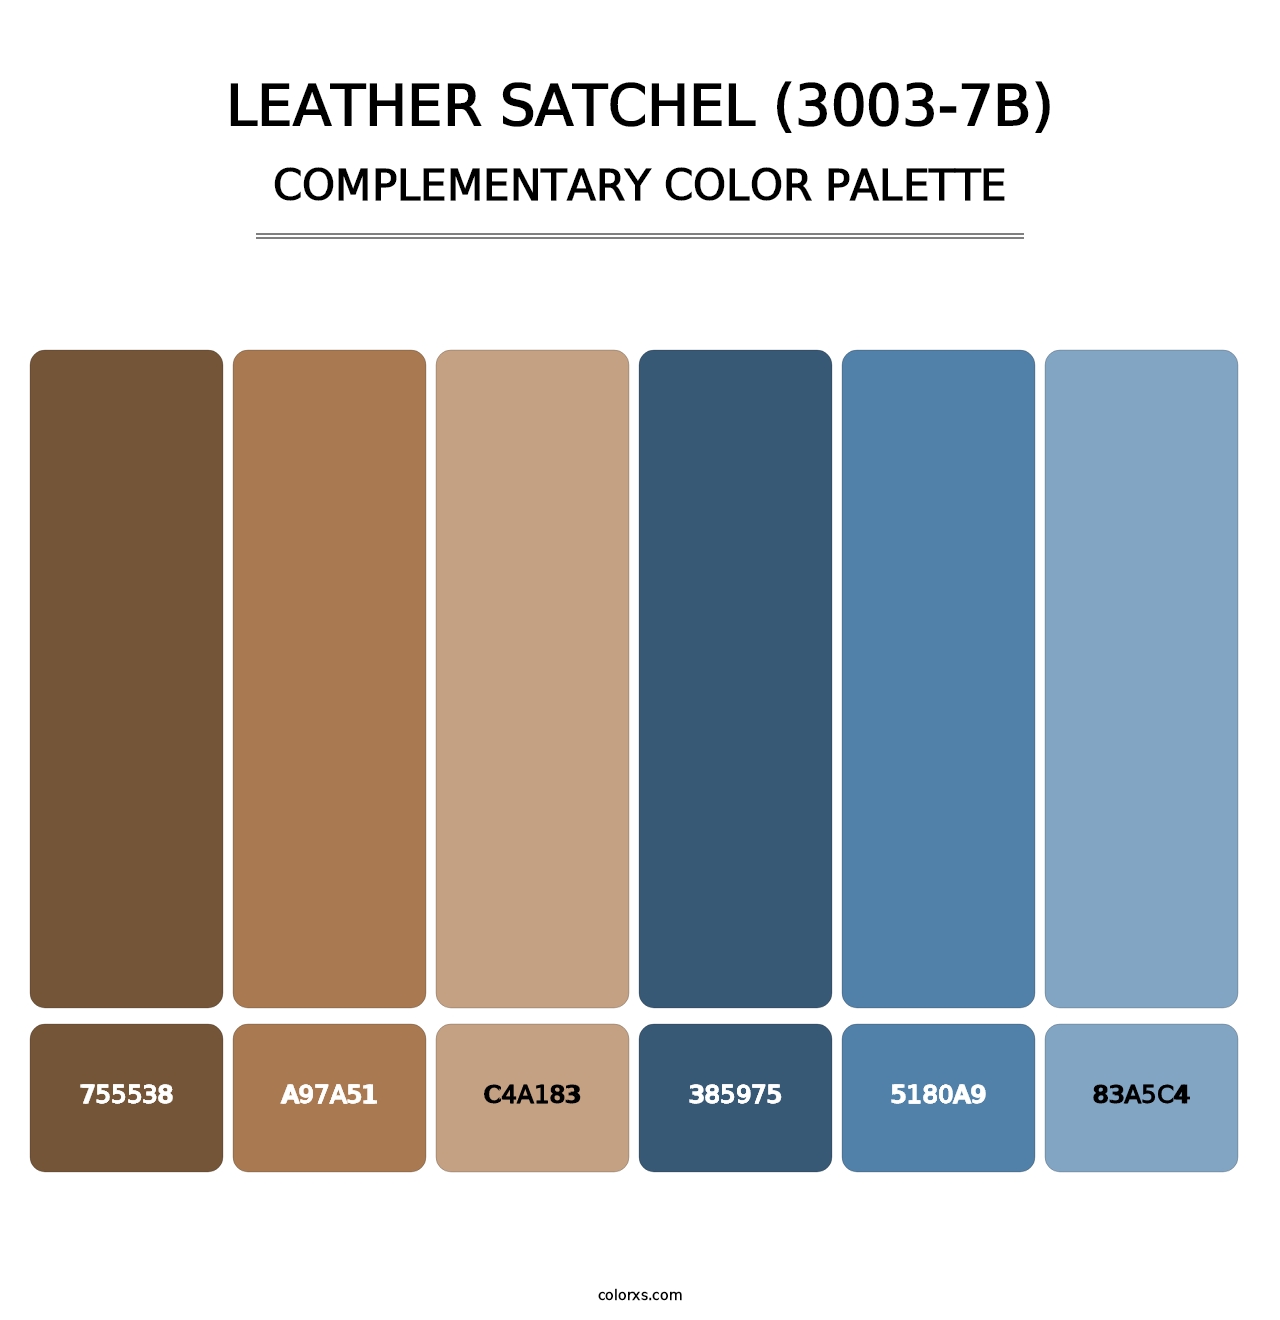 Leather Satchel (3003-7B) - Complementary Color Palette